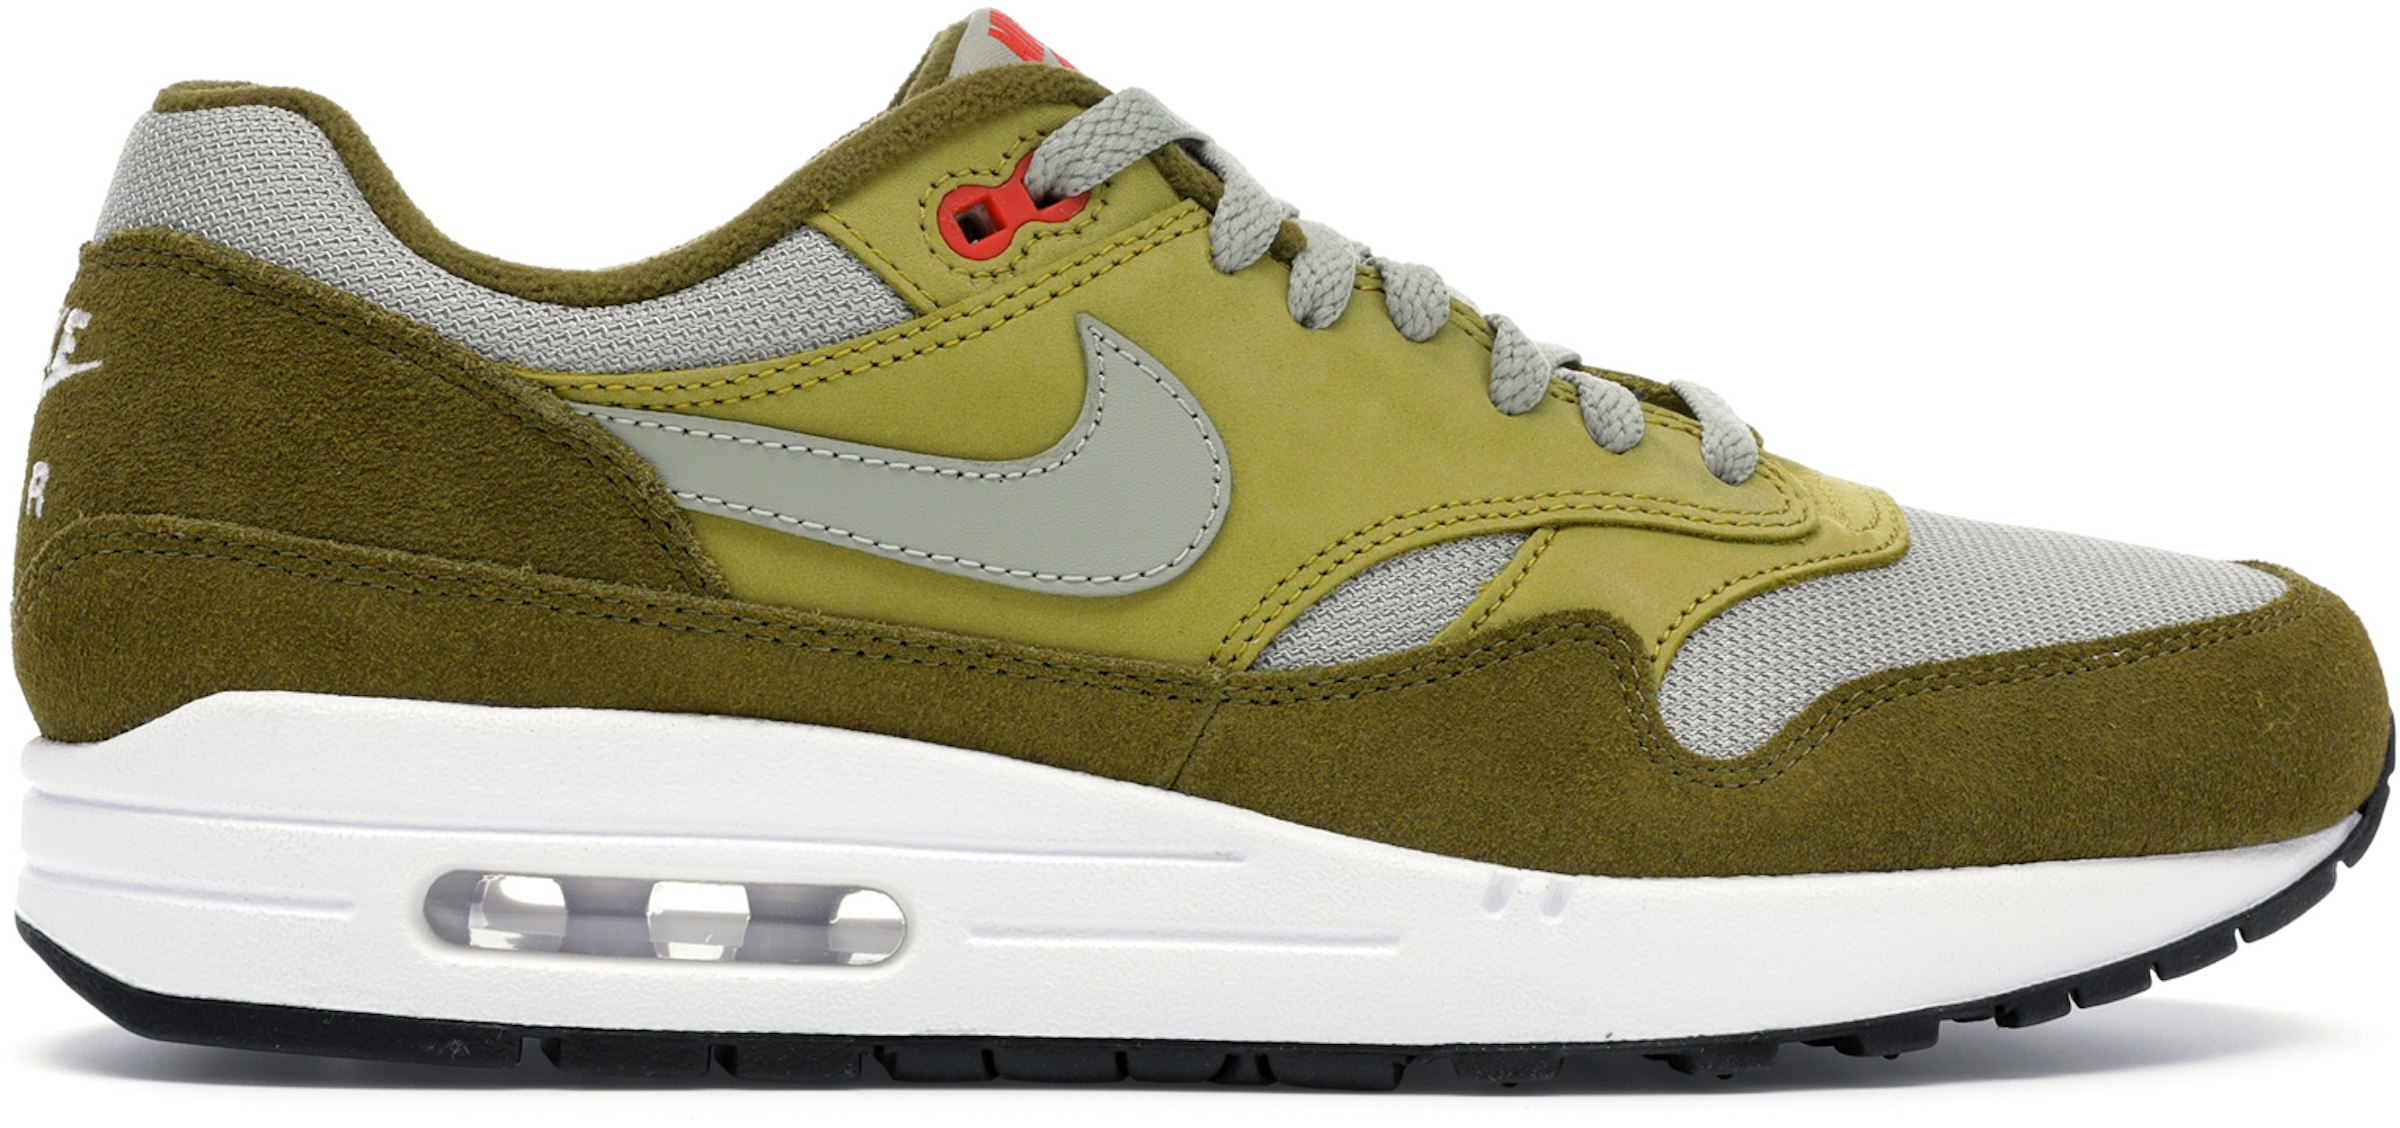 Moviente Borde modelo Nike Air Max 1 Curry Pack (Olive) Men's - 908366-300 - US